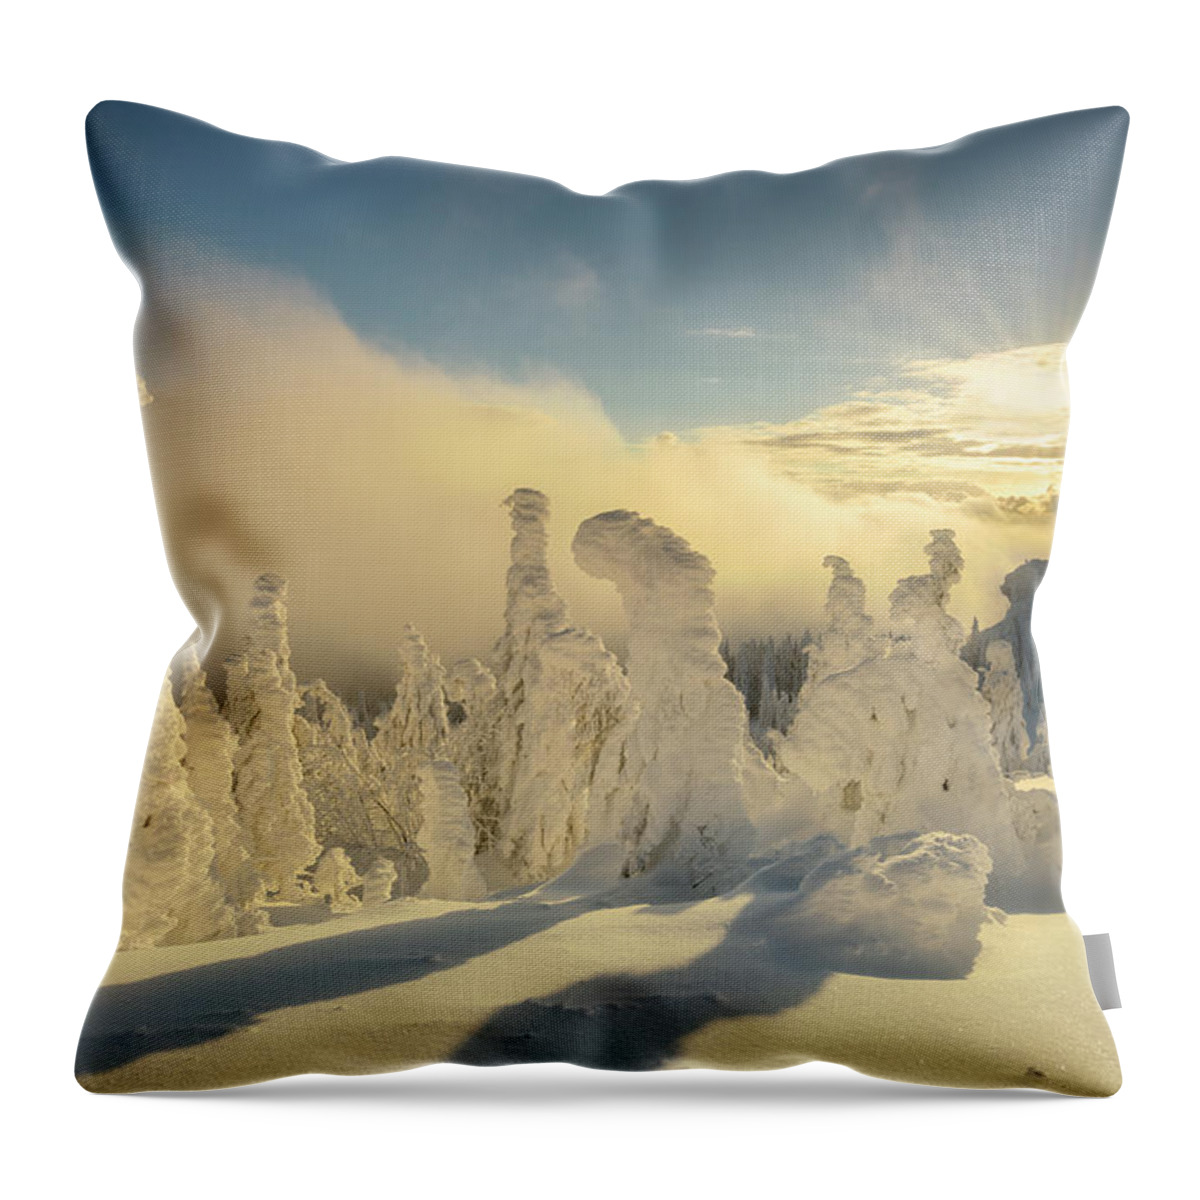 Estock Throw Pillow featuring the digital art Spruces Covered In Deep Snow On Grosser Arber Mountain (1458m), Lower Bavaria, Bavaria, Germany #5 by Cornelia Dorr